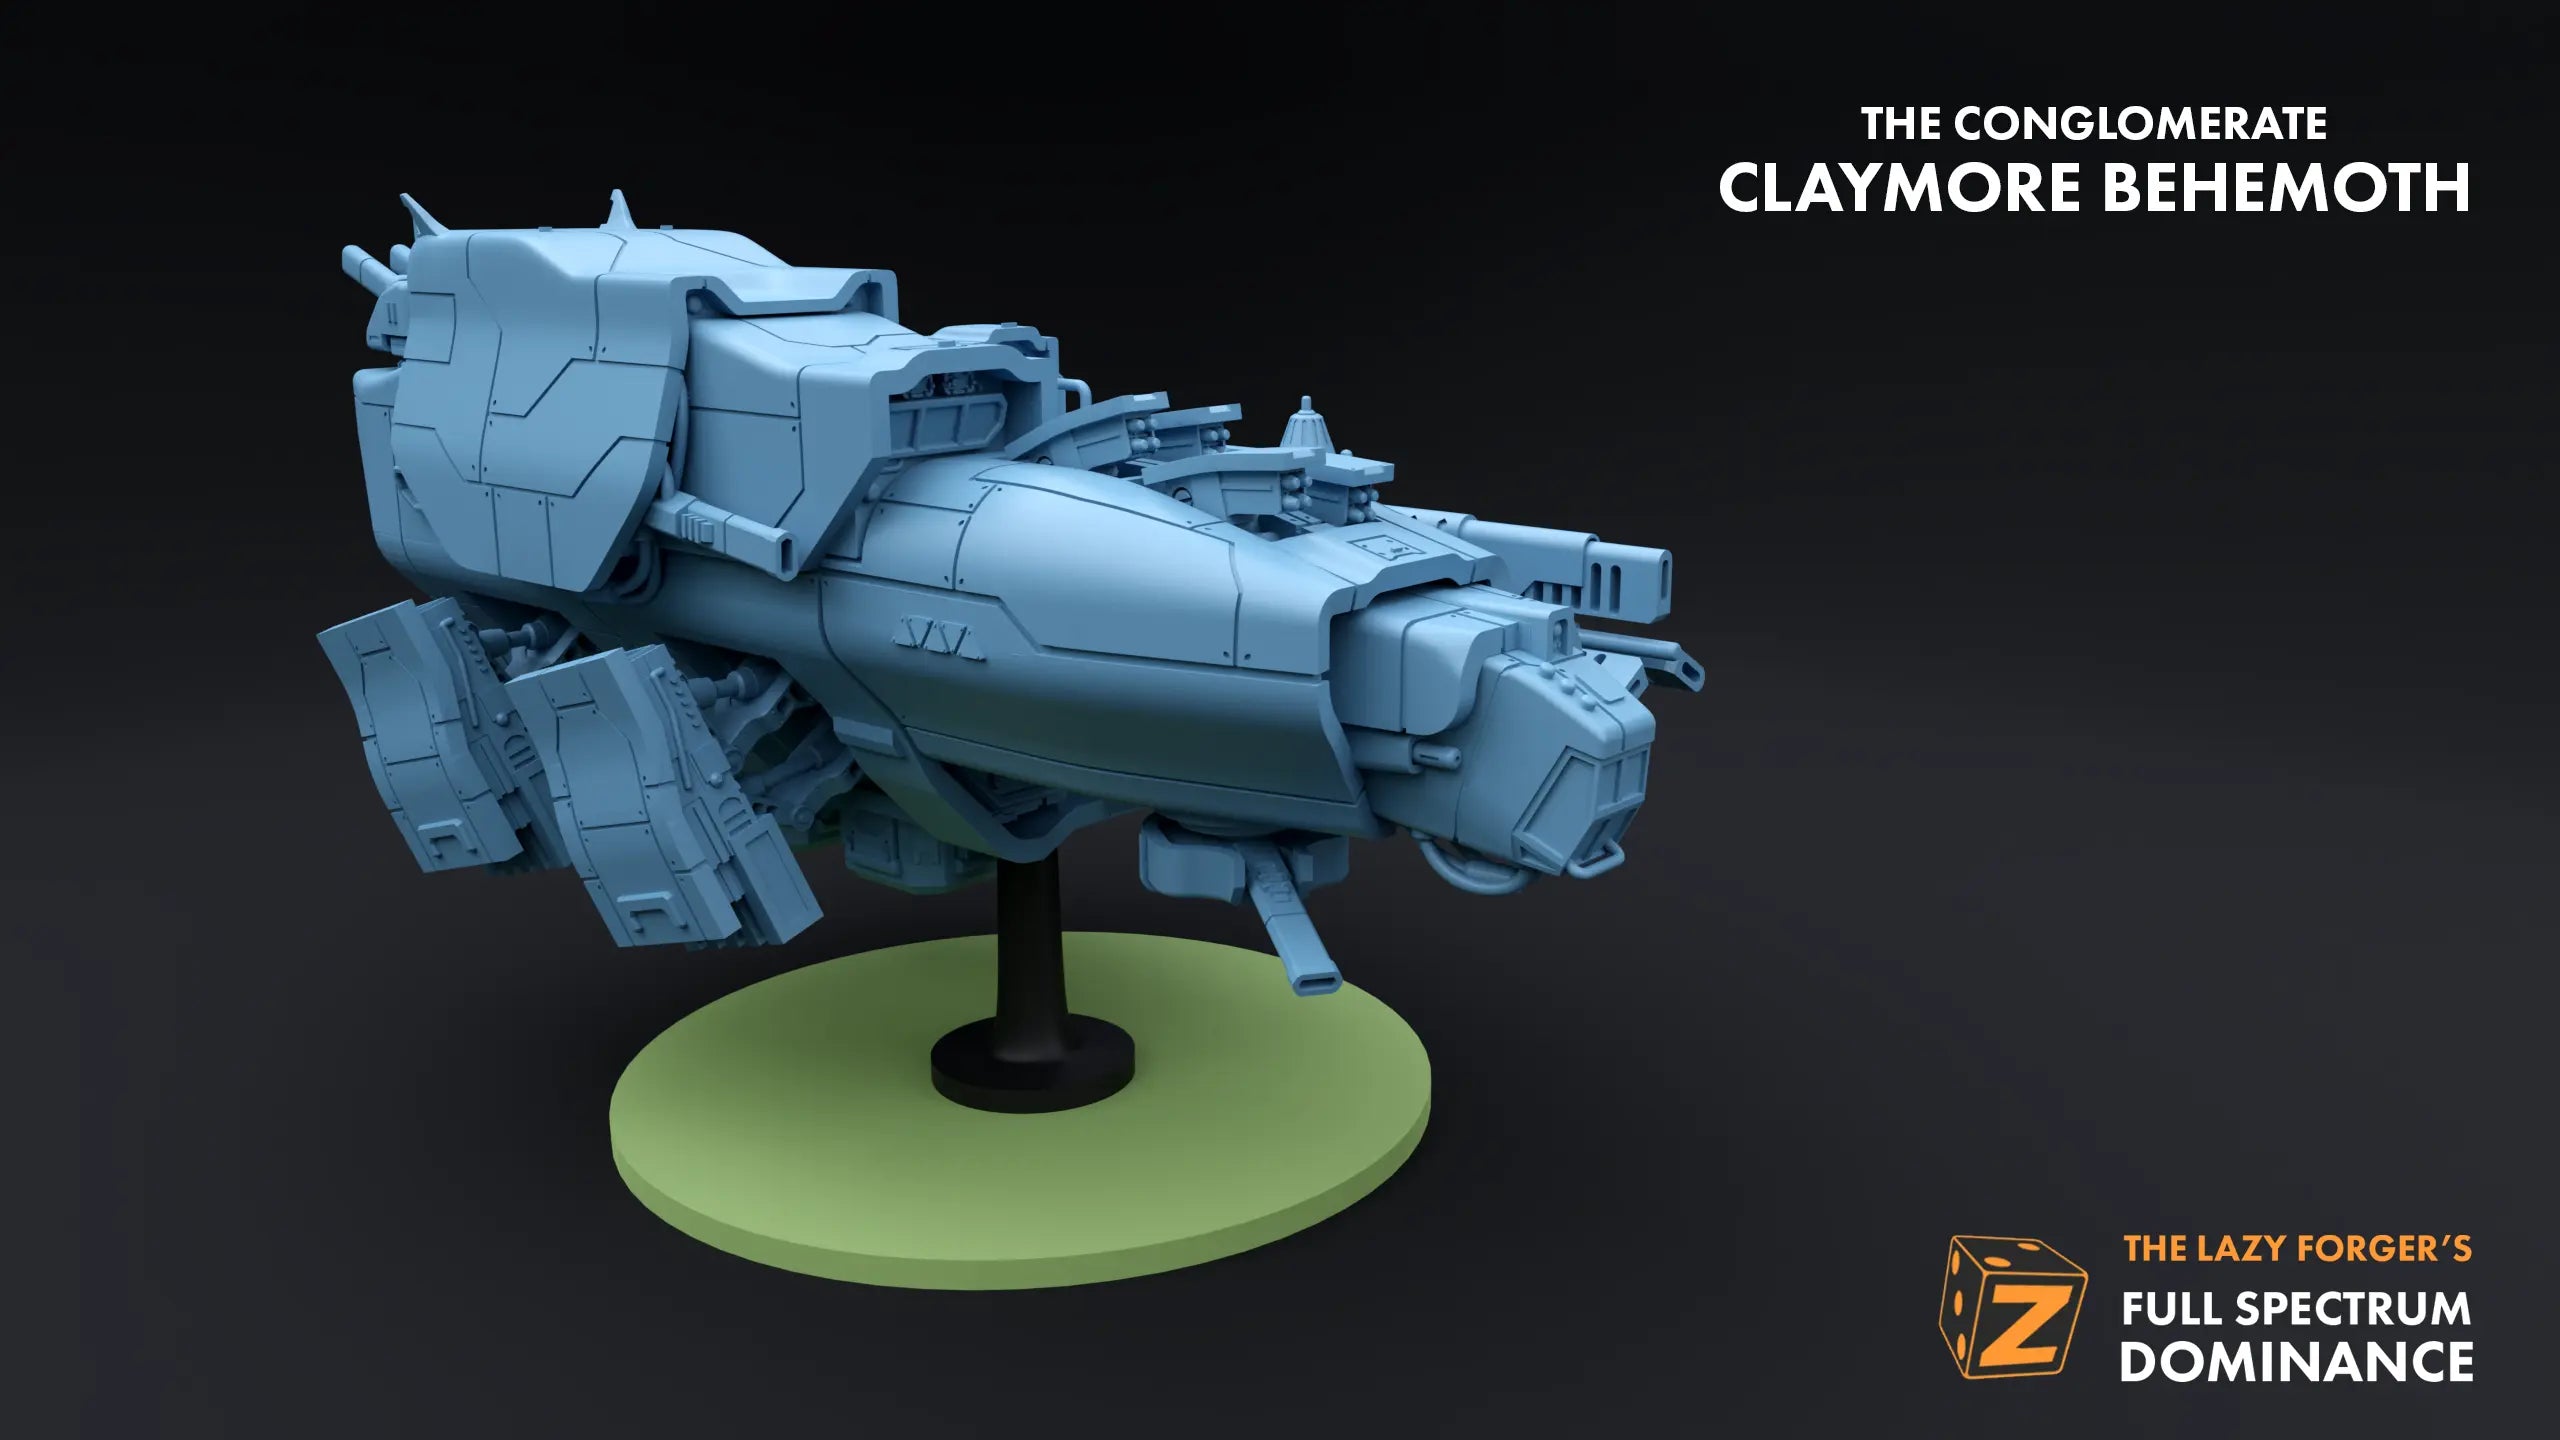 Claymore Behemoth - The Conglomerate The Lazy Forger